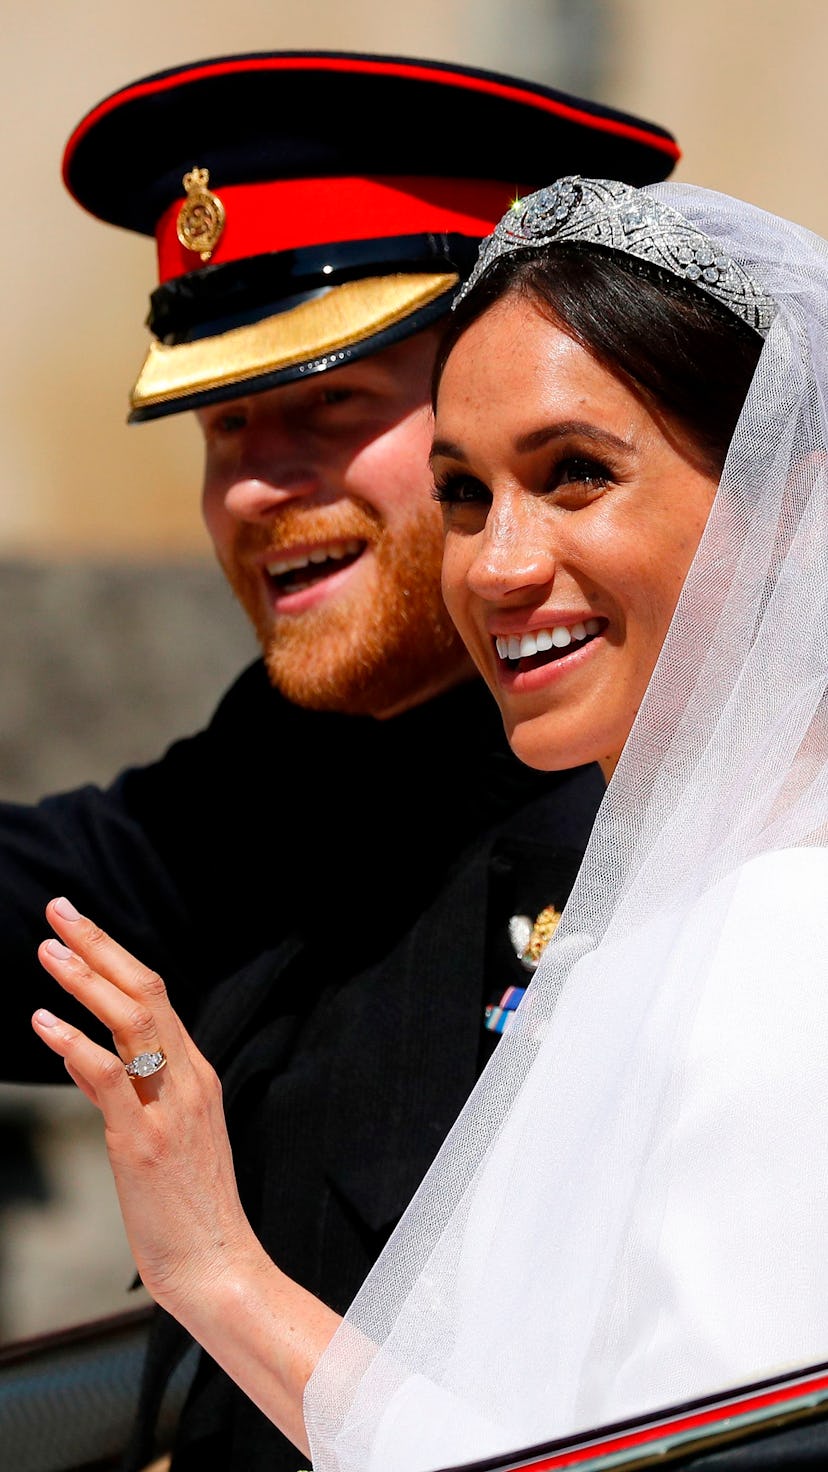 In May 2018, Prince Harry and Meghan Markle got married in England.